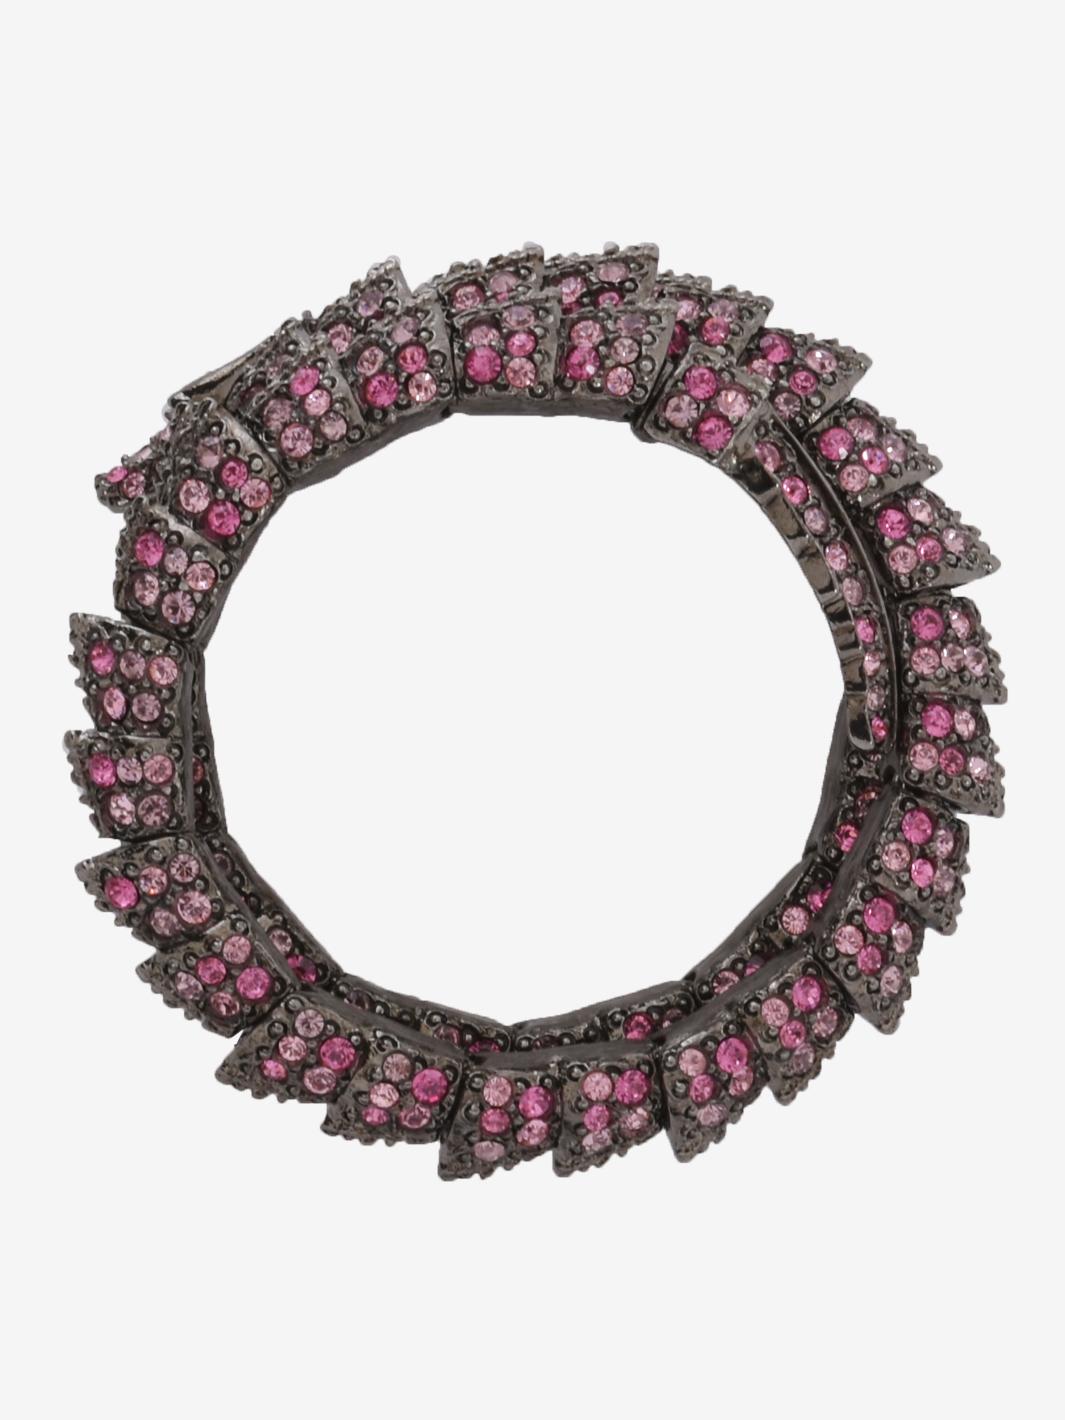 Kenneth Jay Lane Snake Bracelet with pink rhinestones. Bracelet with pink stones; clasp depicting the head of a snake. Bracelet with pink stones; spiral shape; depicting the head of a snake and with a scale-like body. 

STATE OF PRESERVATION
Optimal